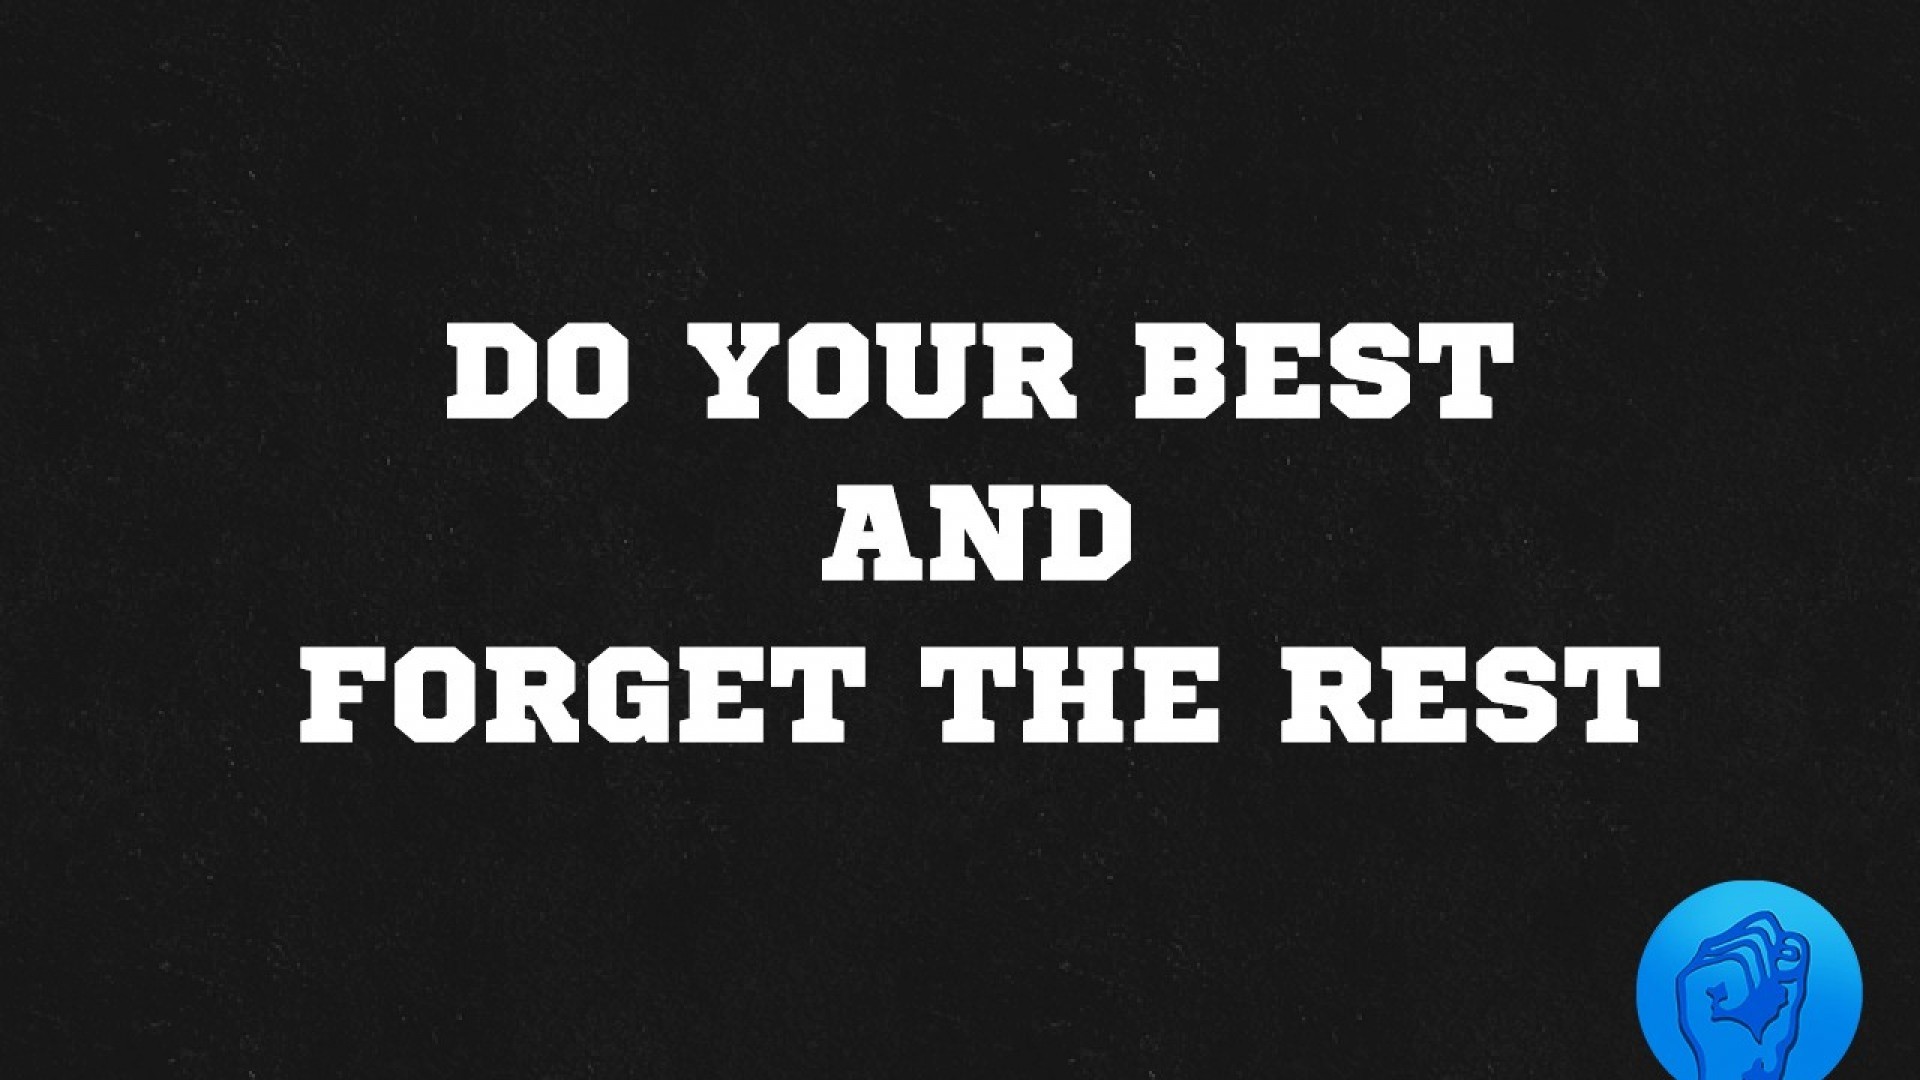 1920x1080 GYM MOTIVATIONAL QUOTES WALLPAPERS image quotes at BuzzQuotescom 